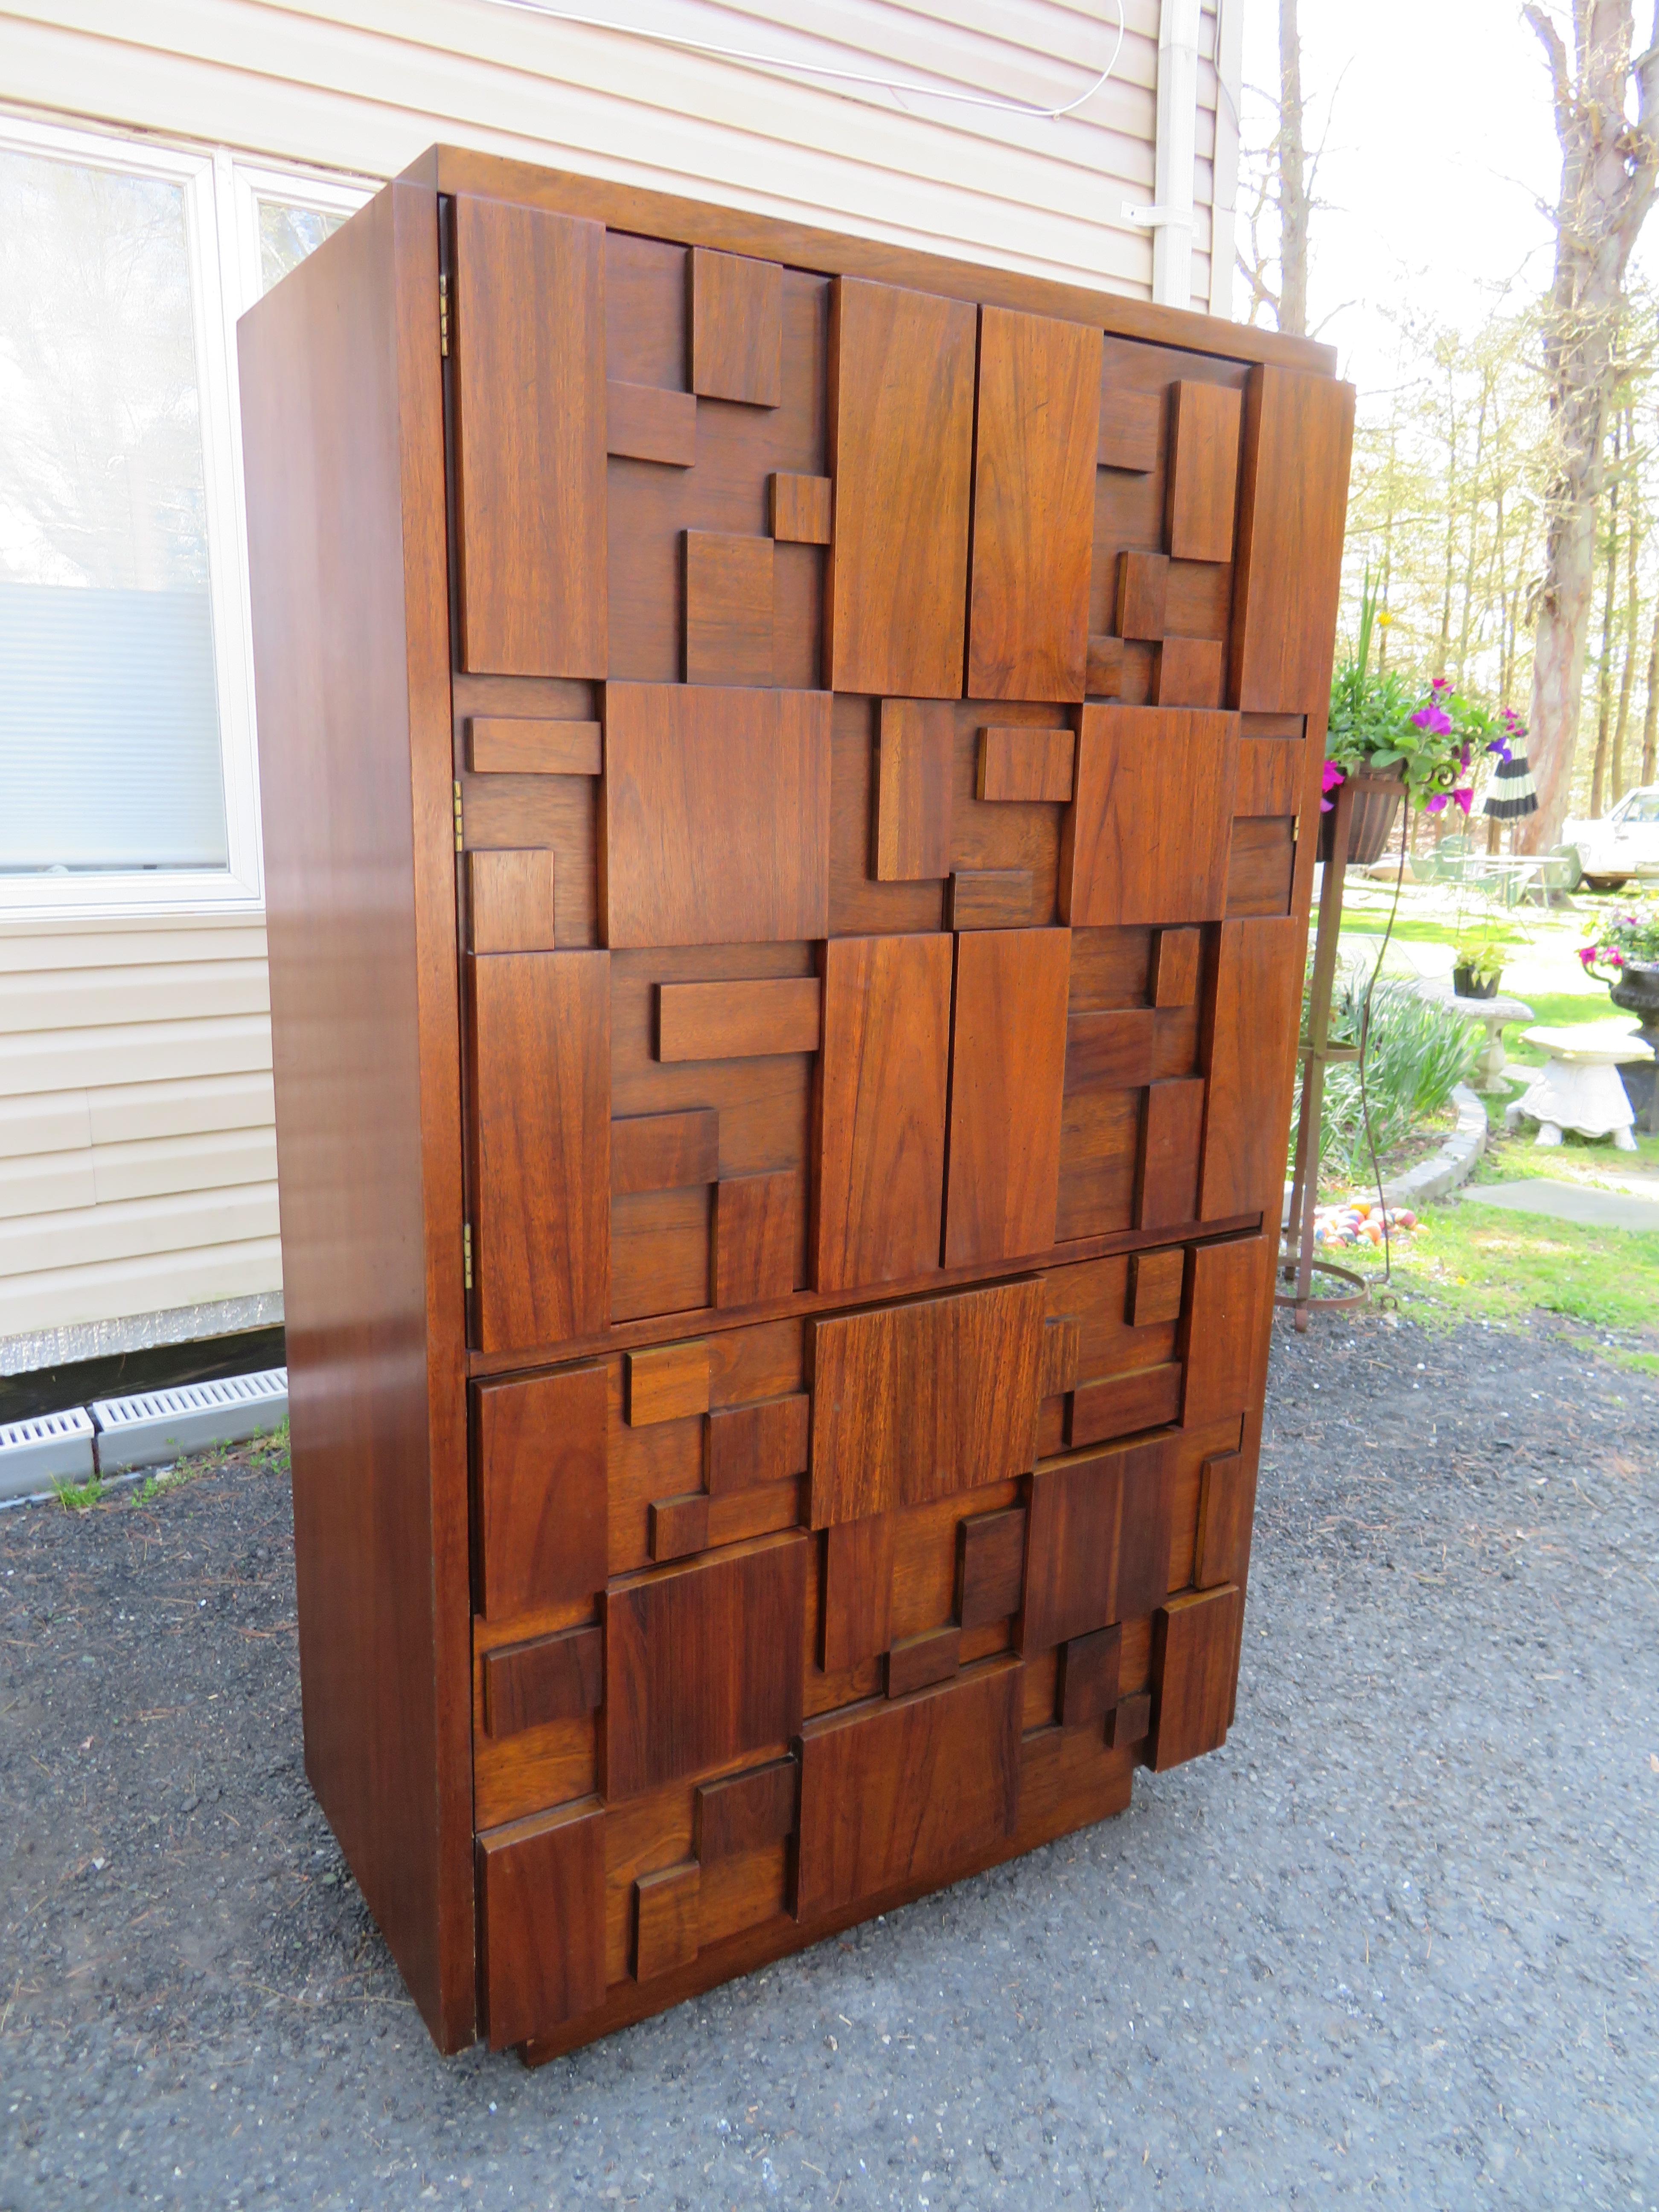 This unique gentleman's chest by Lane furniture features the brutalist mosaic style made popular by Paul Evans. Plenty of storage for any setting, unique cabinet portion features shelf space and an extra drawer. This piece measures 64.25